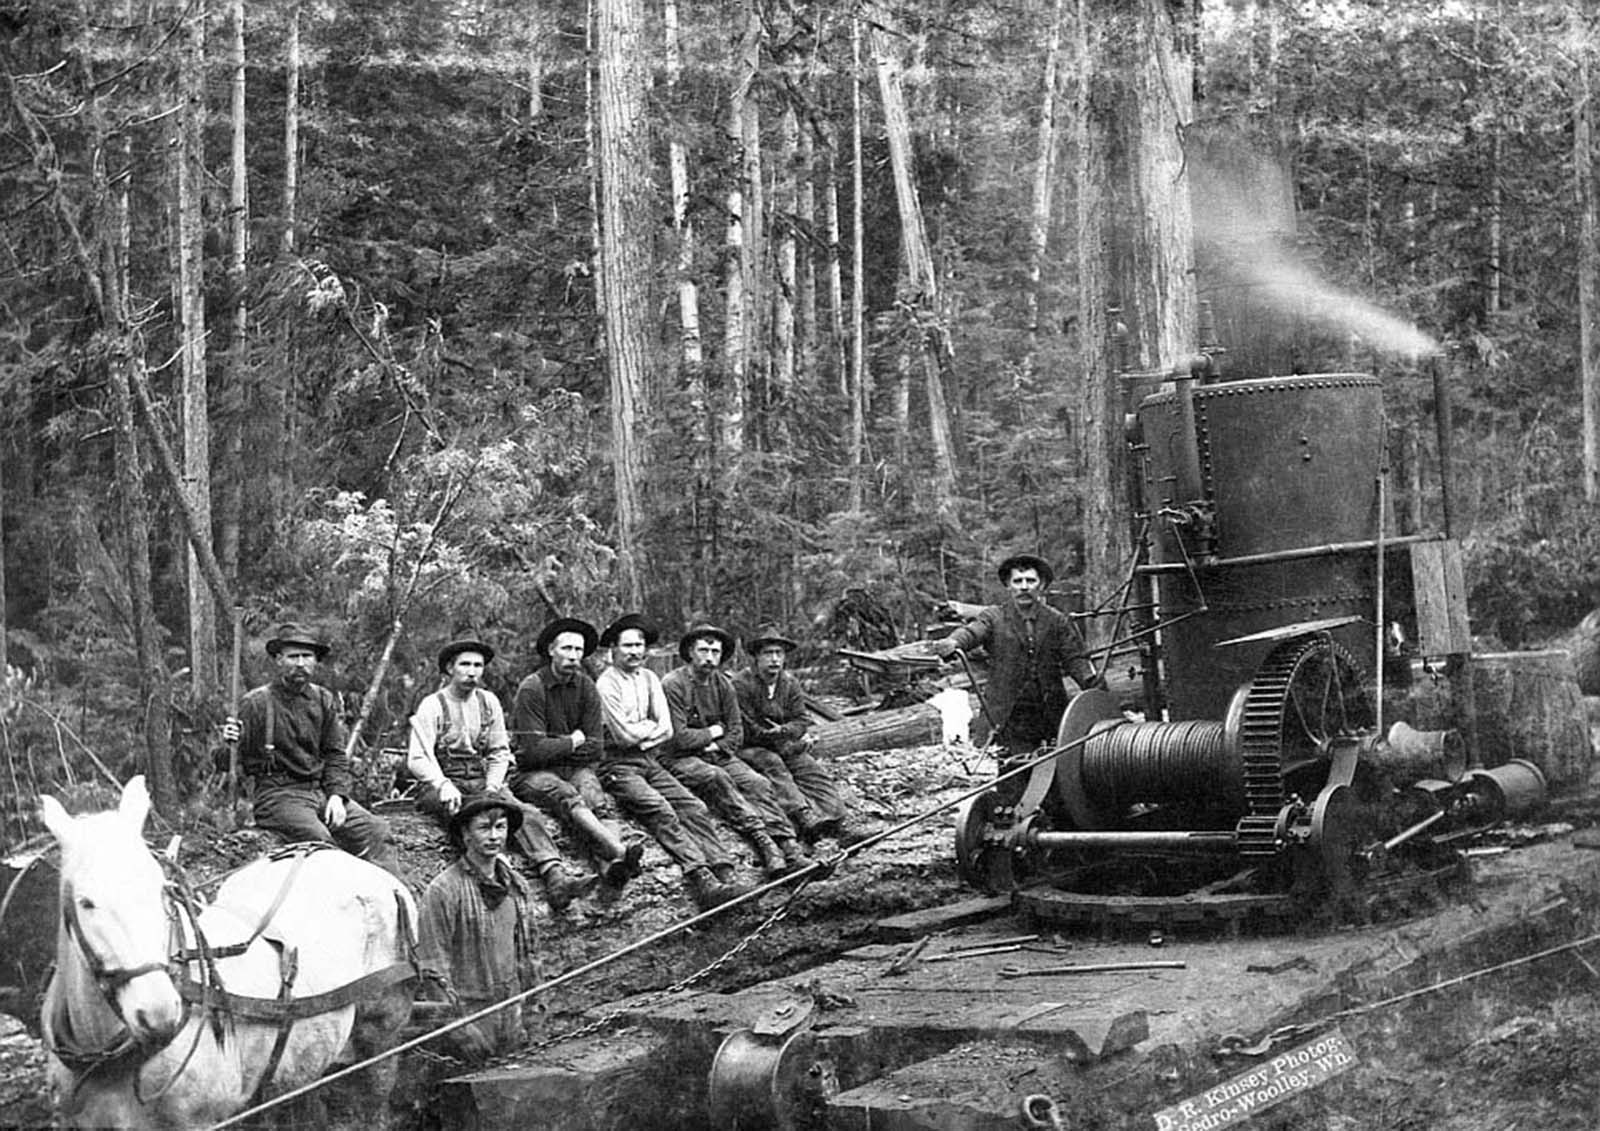 A crew in 1900 Washington state poses next to a donkey engine used for yarding logs, or gathering logs together after they are cut.